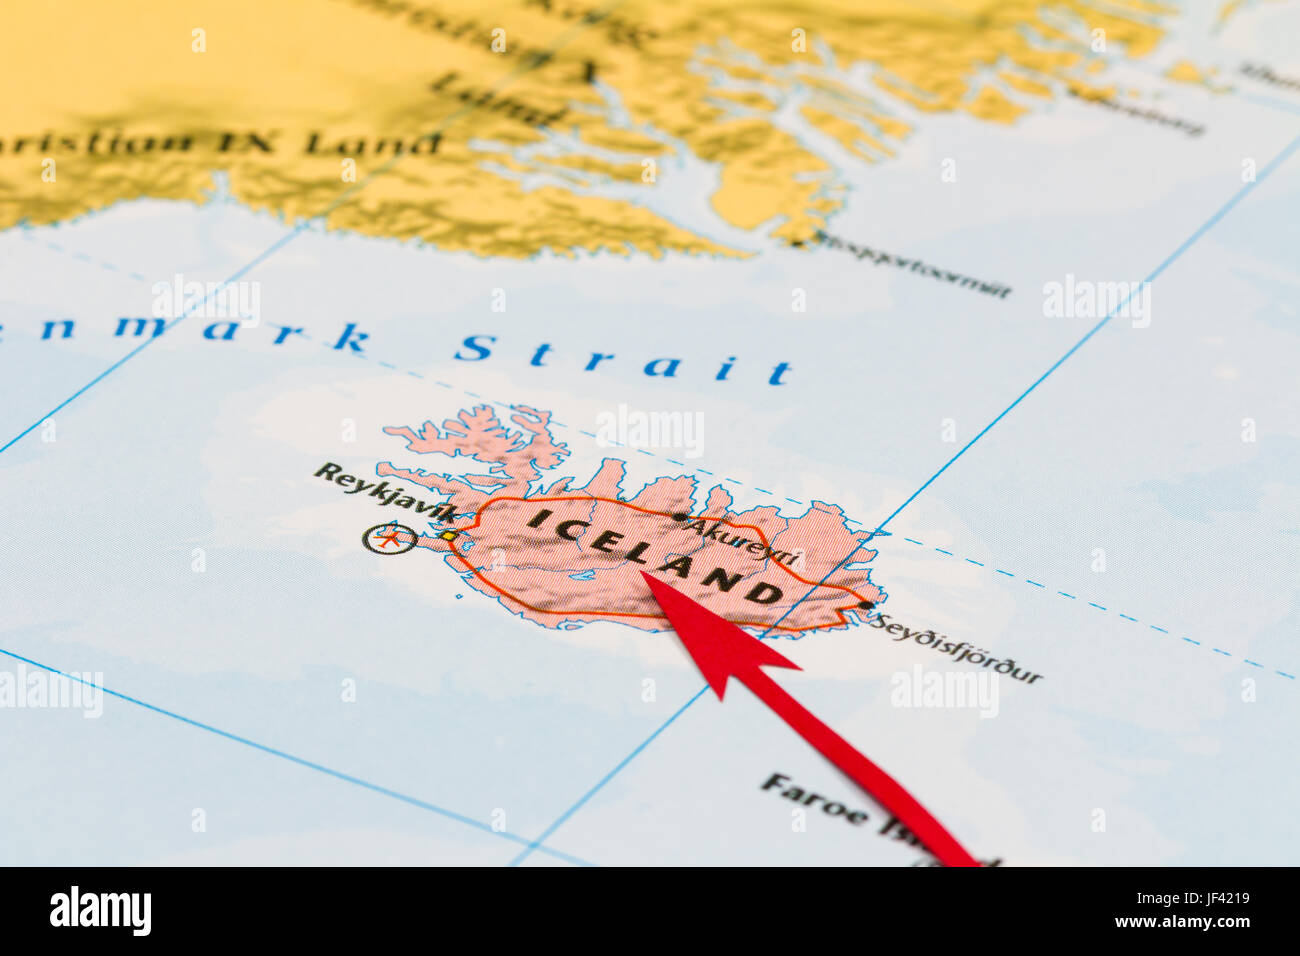 Photo of Iceland. Country indicated by red arrow. Country on European continent. Stock Photo